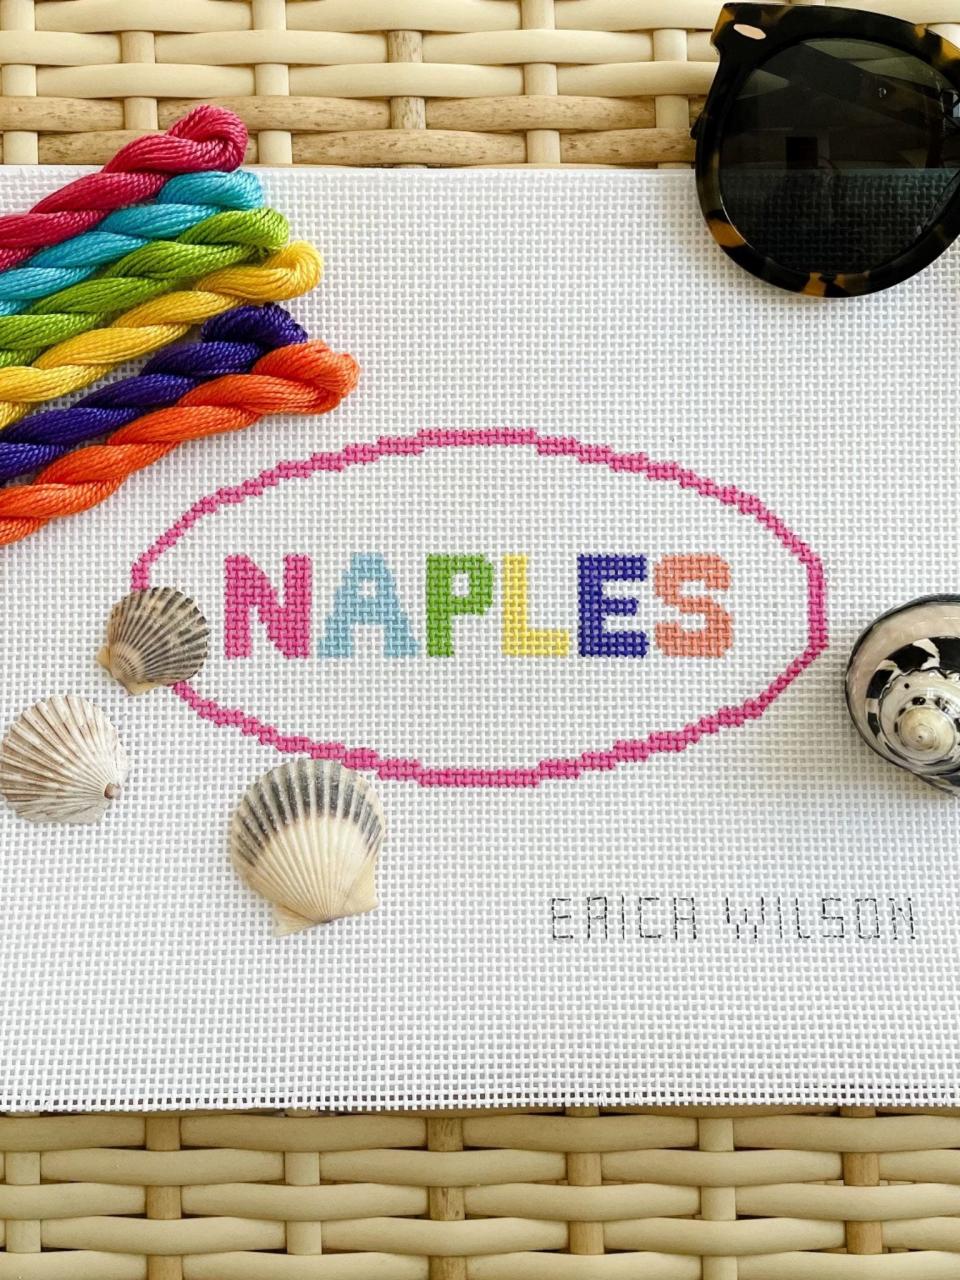 Real Macaw's pop-up shop offers Erica Wilson's Naples-themed needlepoint canvases.